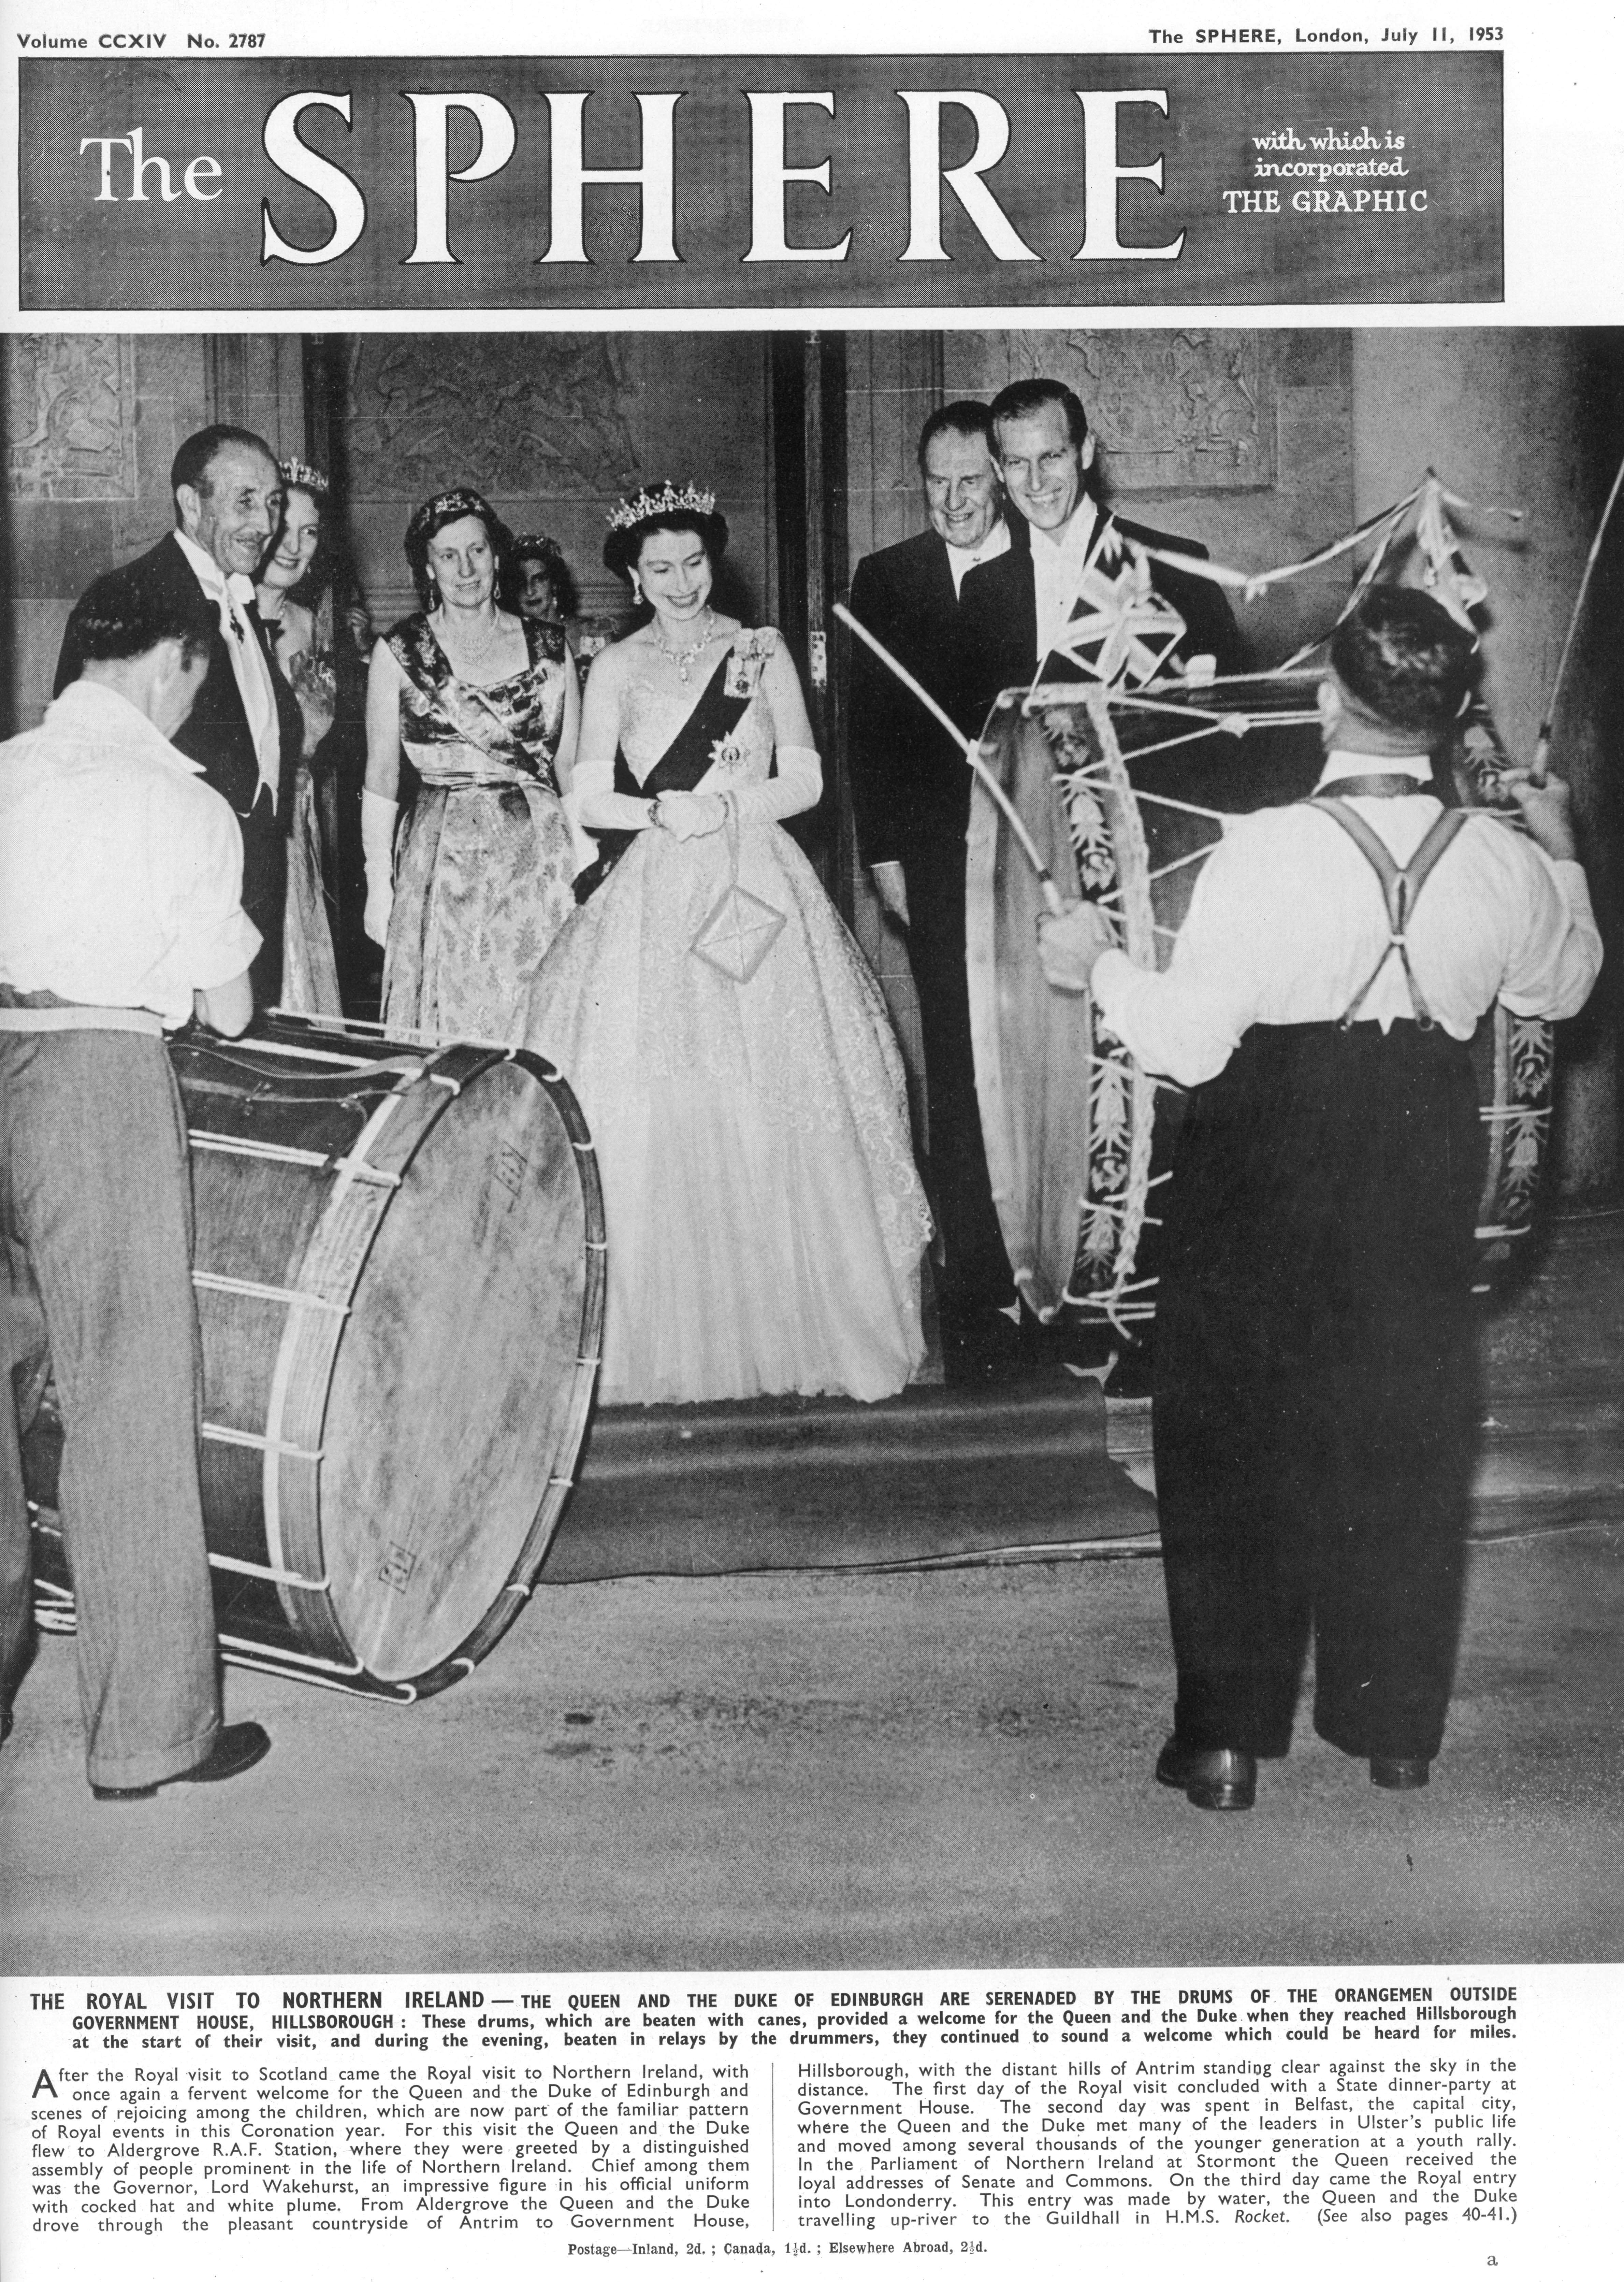 First Anniversary The Queen’s Death - The Queen and Duke of Edinburgh serenaded by the drums of the orangemen in Hillsborough, Northern Ireland, 1953